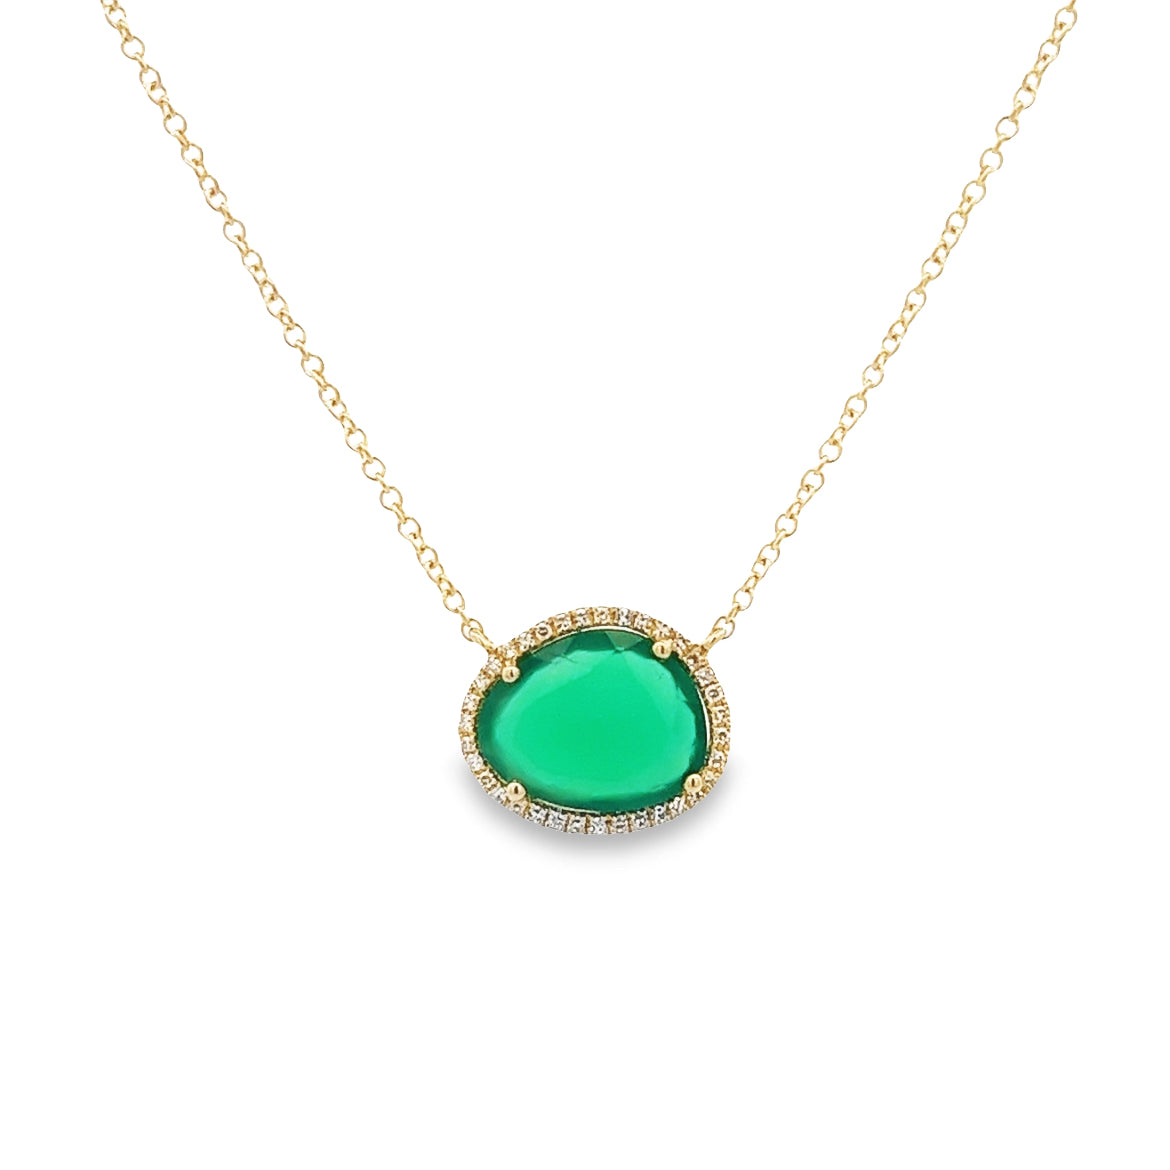 14K GOLD IRREGULAR GREEN ONIX WITH HALO NECKLACE